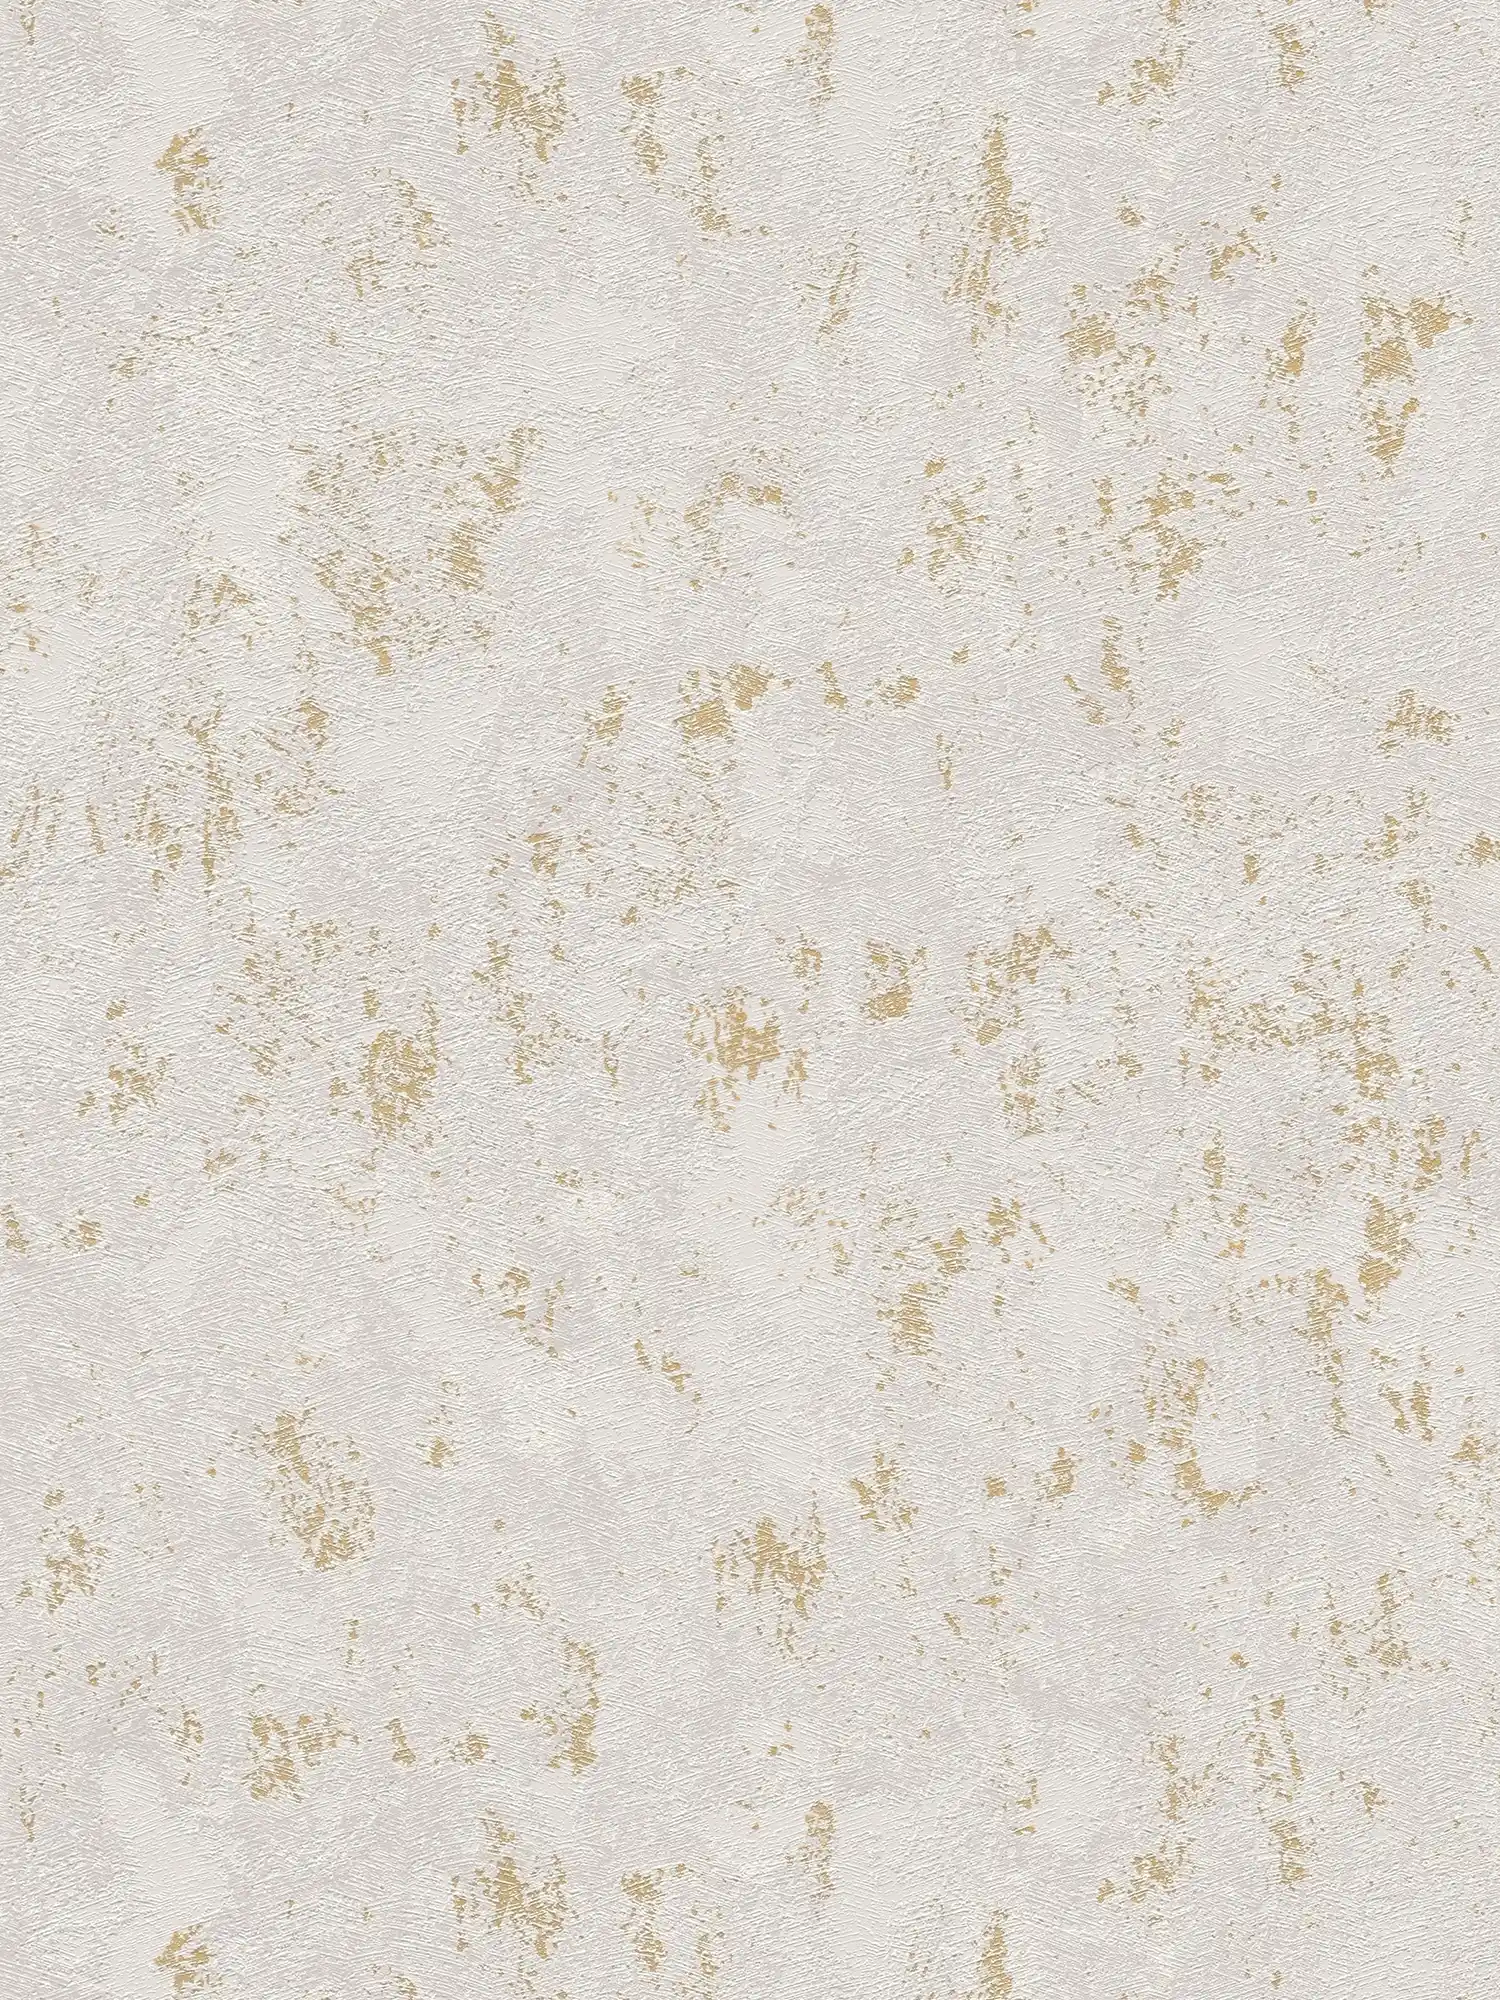 Non-woven wallpaper in plaster look with gold accents - beige, grey, gold
